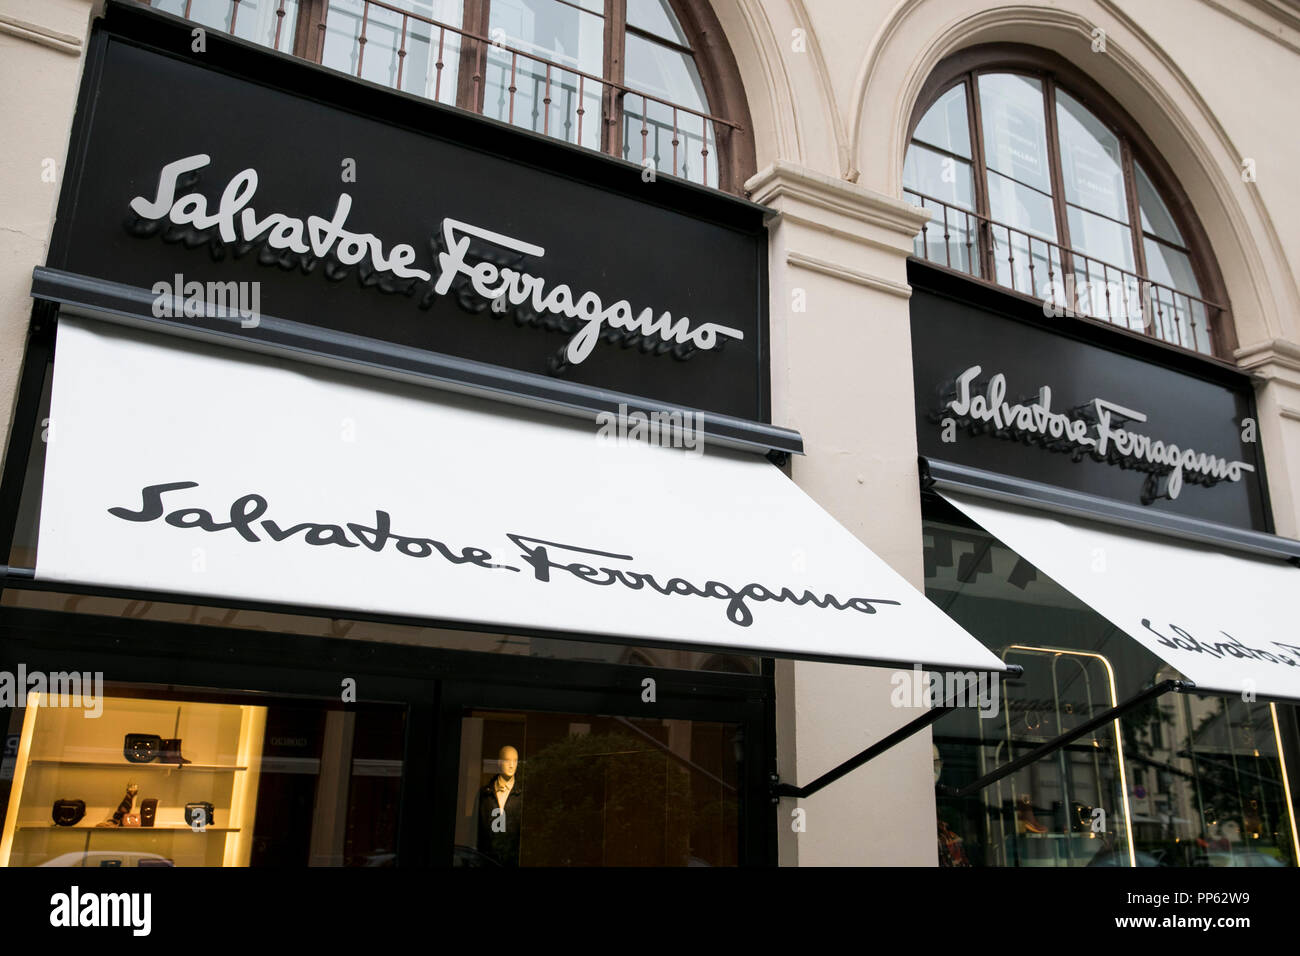 A logo sign outside of a Salvatore Ferragamo retail store in Munich, Germany, on September 2, 2018. Stock Photo